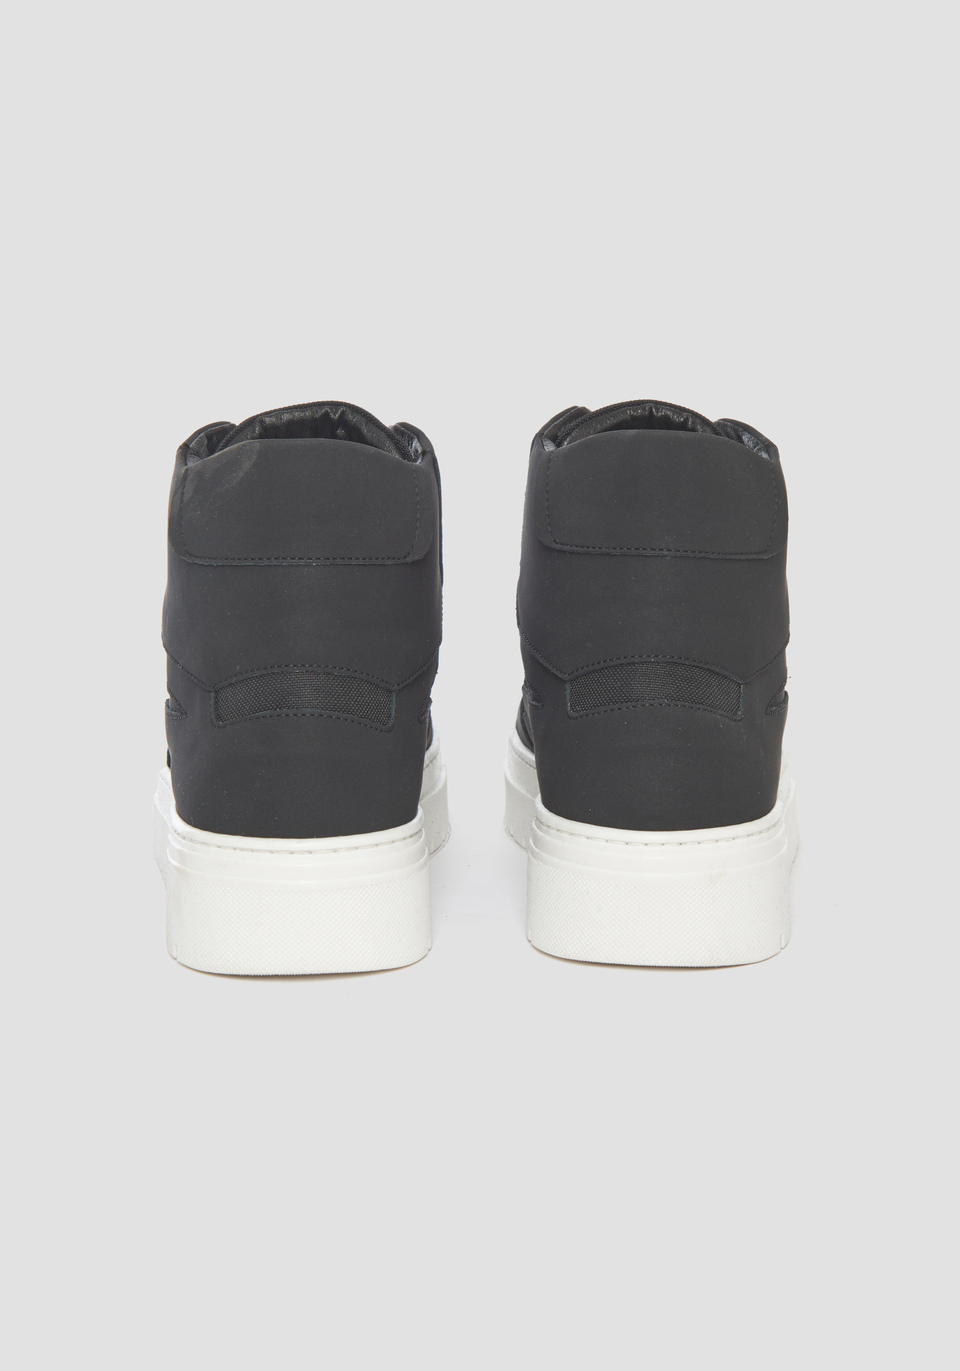 "GOSH" MID-TOP SNEAKERS IN FABRIC AND RECYCLED NUBUCK - Antony Morato Online Shop